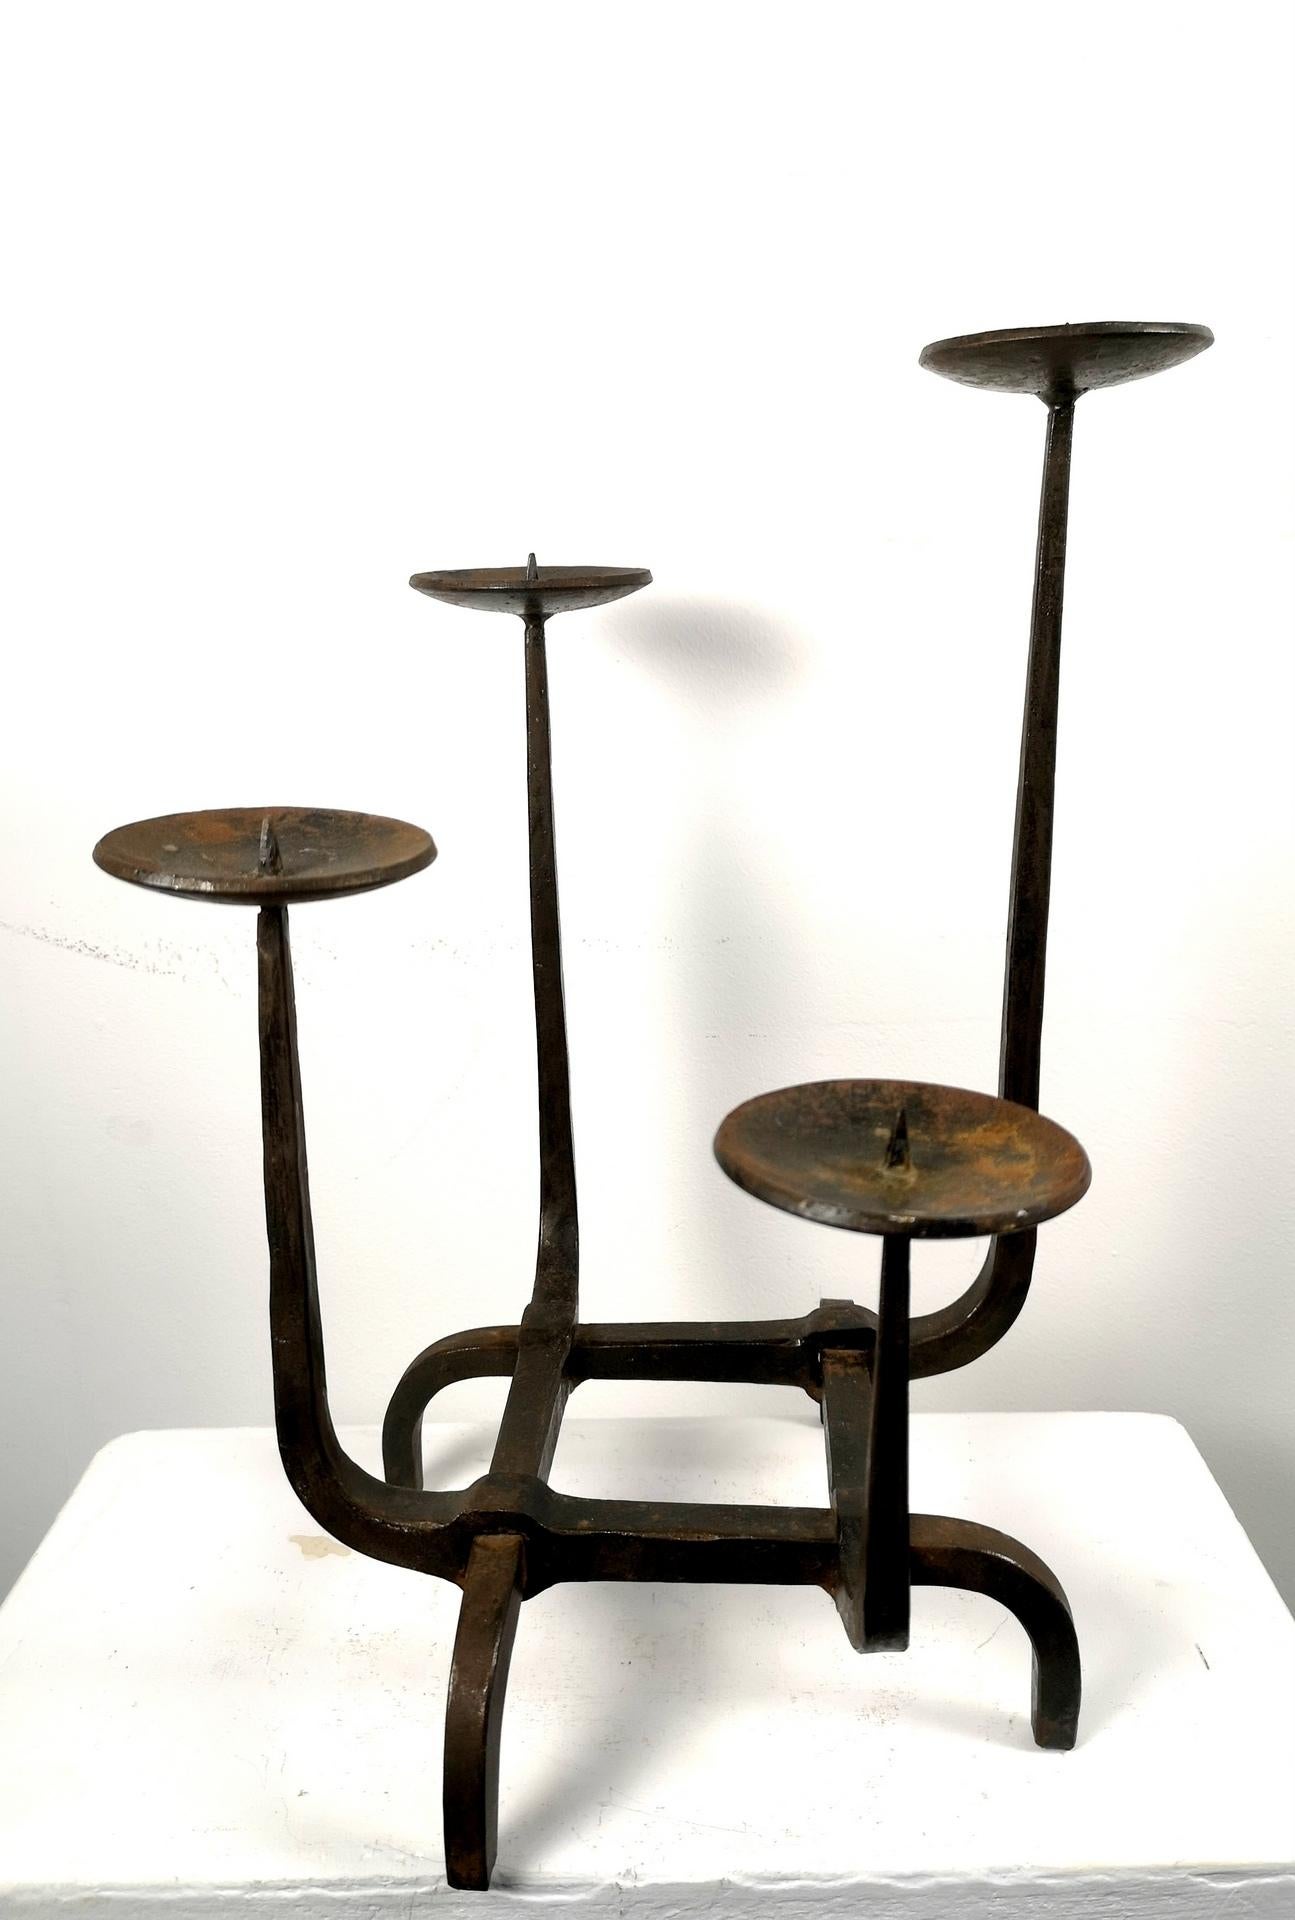 Late 20th Century Rare Hand-Wrought Iron Candelabra, in Brutalist Style, 1970's